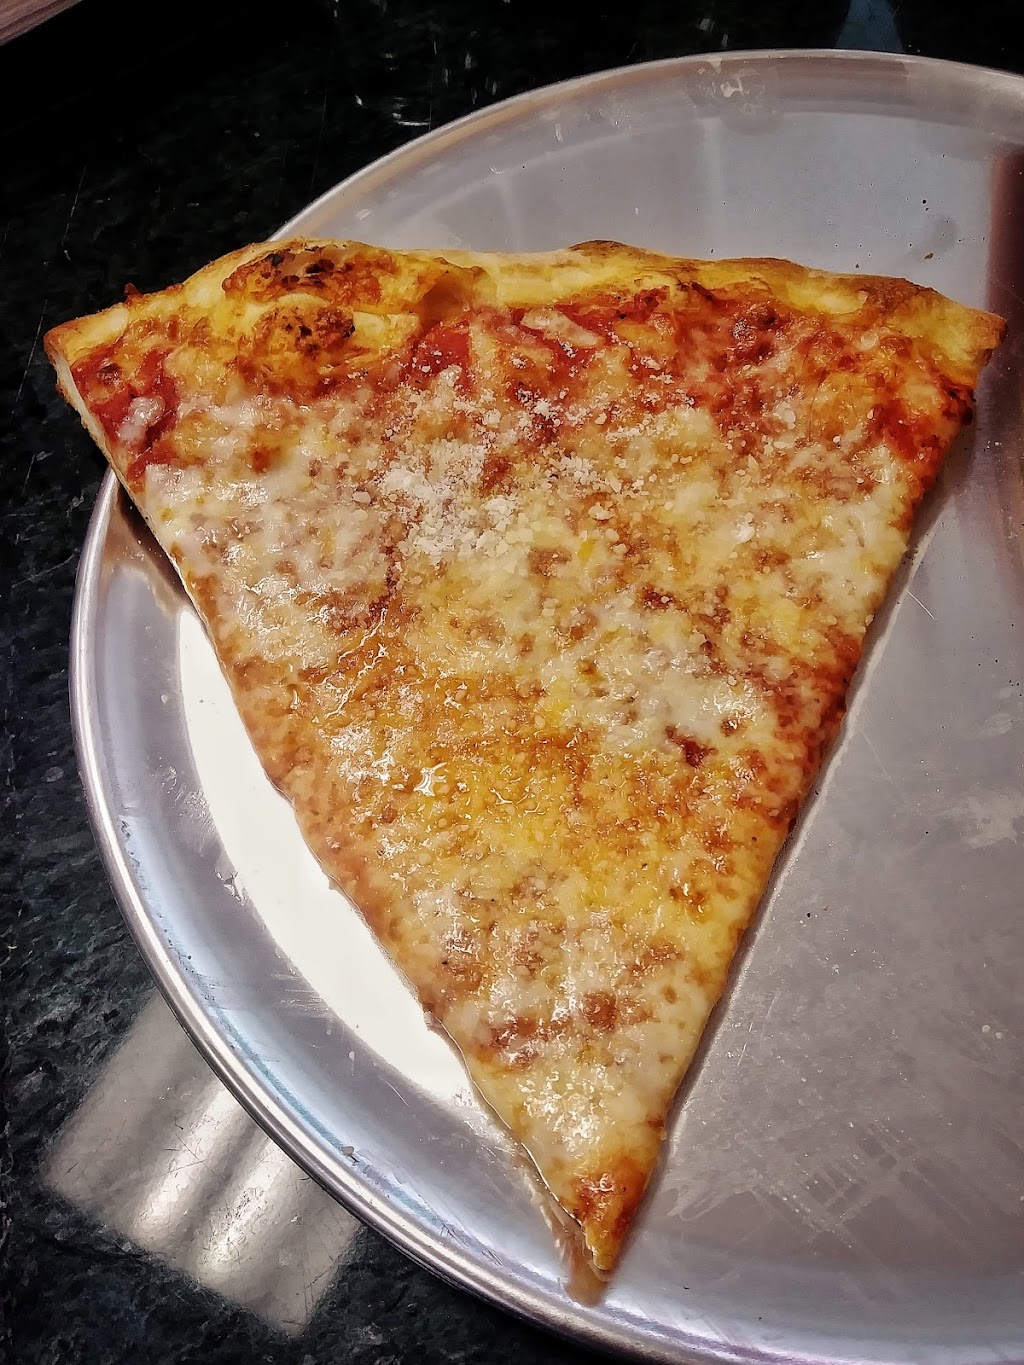 Francescos Pizzeria & Restaurant | 550 Count Rd. 530 The Crestwood Villlage, Shopping Center, 550 County Rd 530, Manchester Township, NJ 08759 | Phone: (732) 849-3768